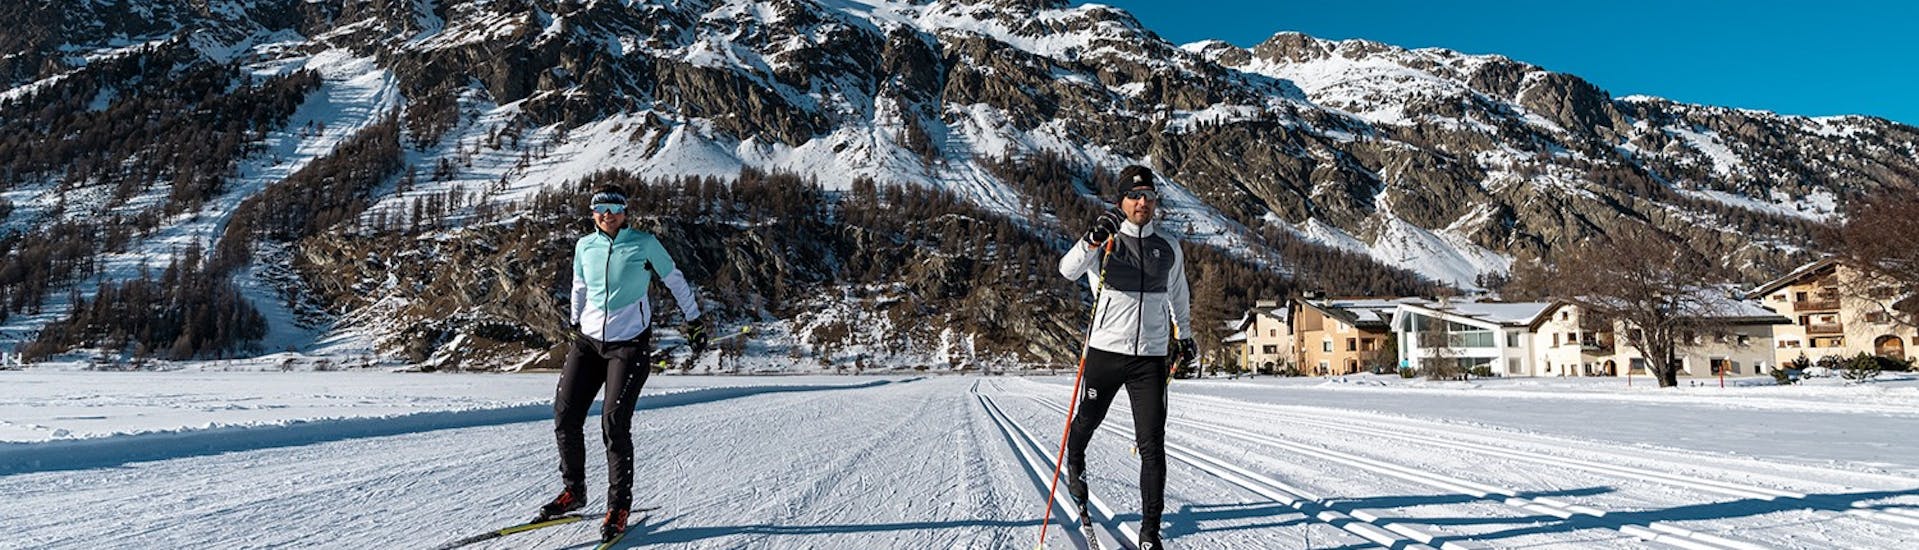 Two skiers enjoying their Private Cross Country Skiing Lessons for All Levels.